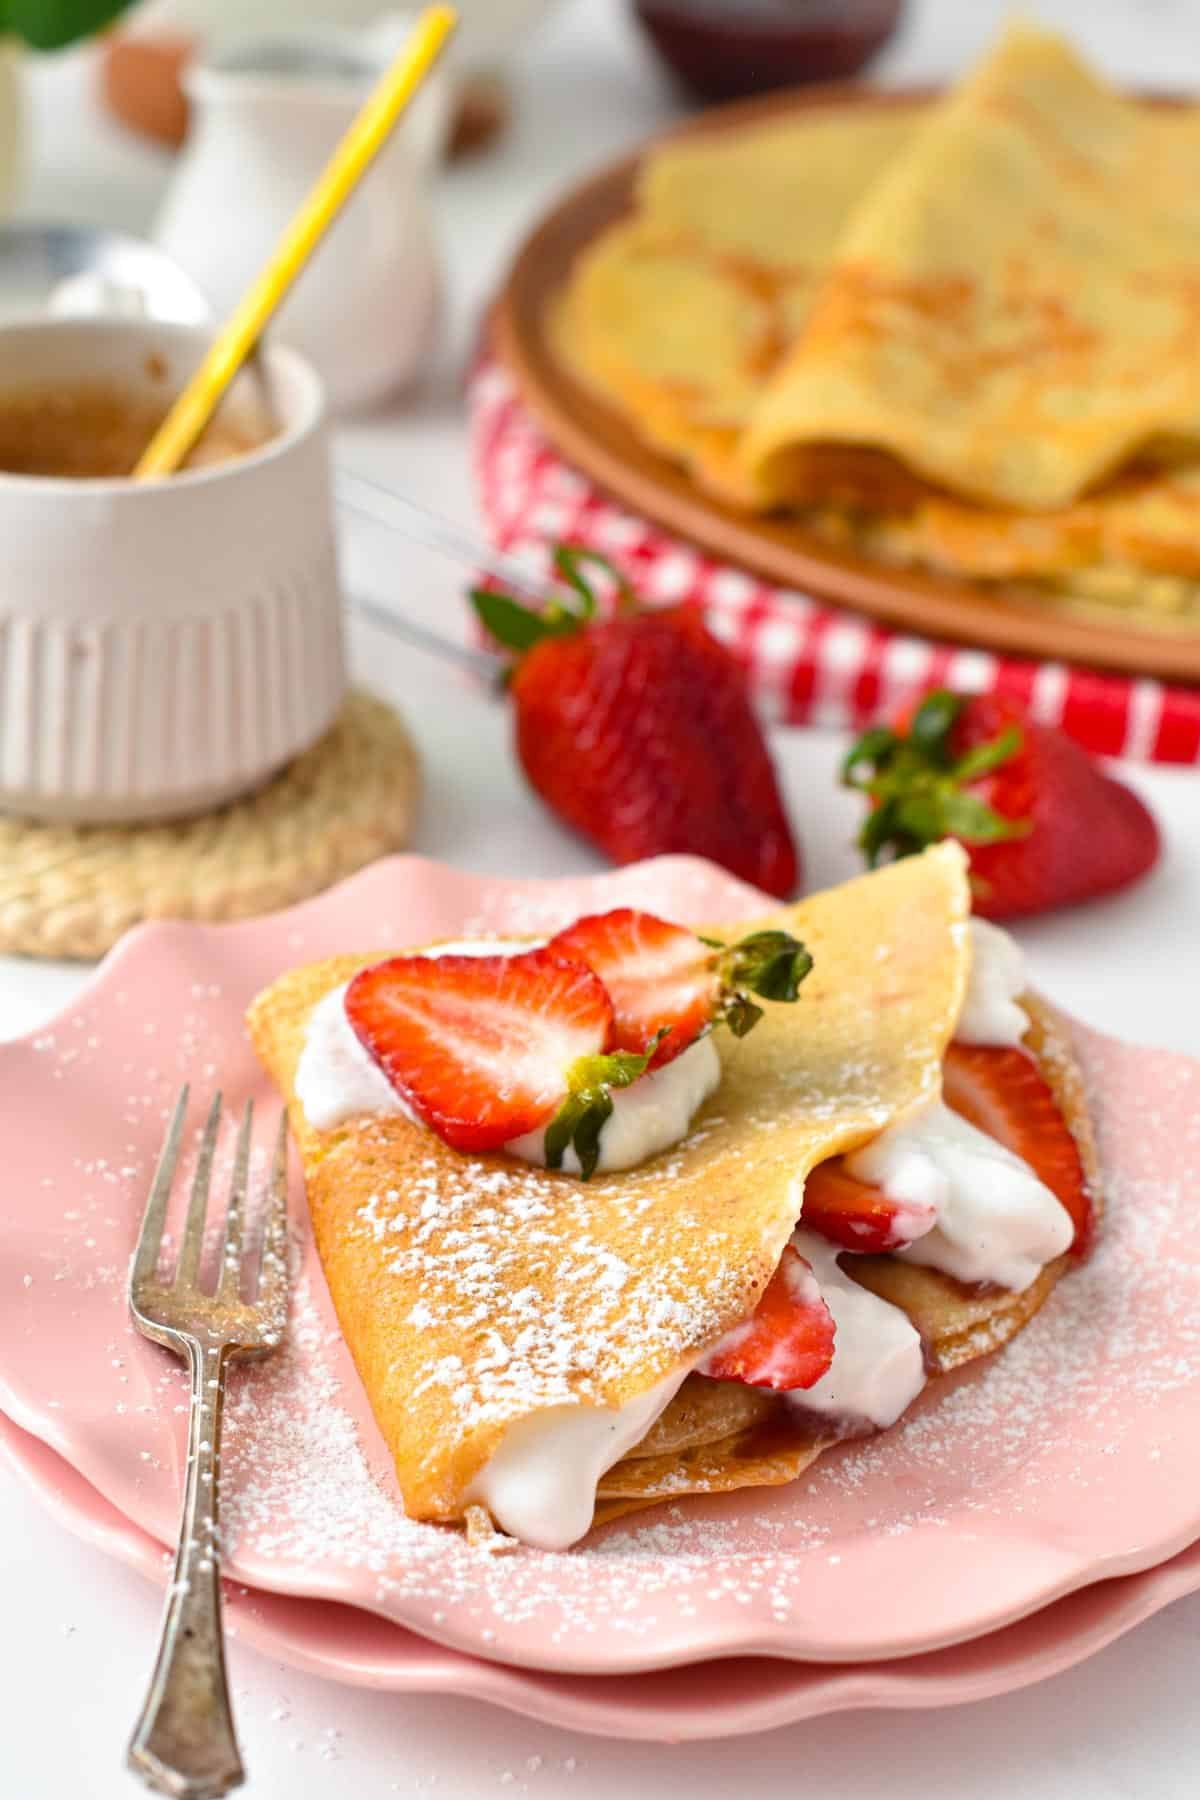 A vegan French crepe filled with strawberries, dairy-free whipped cream with more vegan crepes in the background.